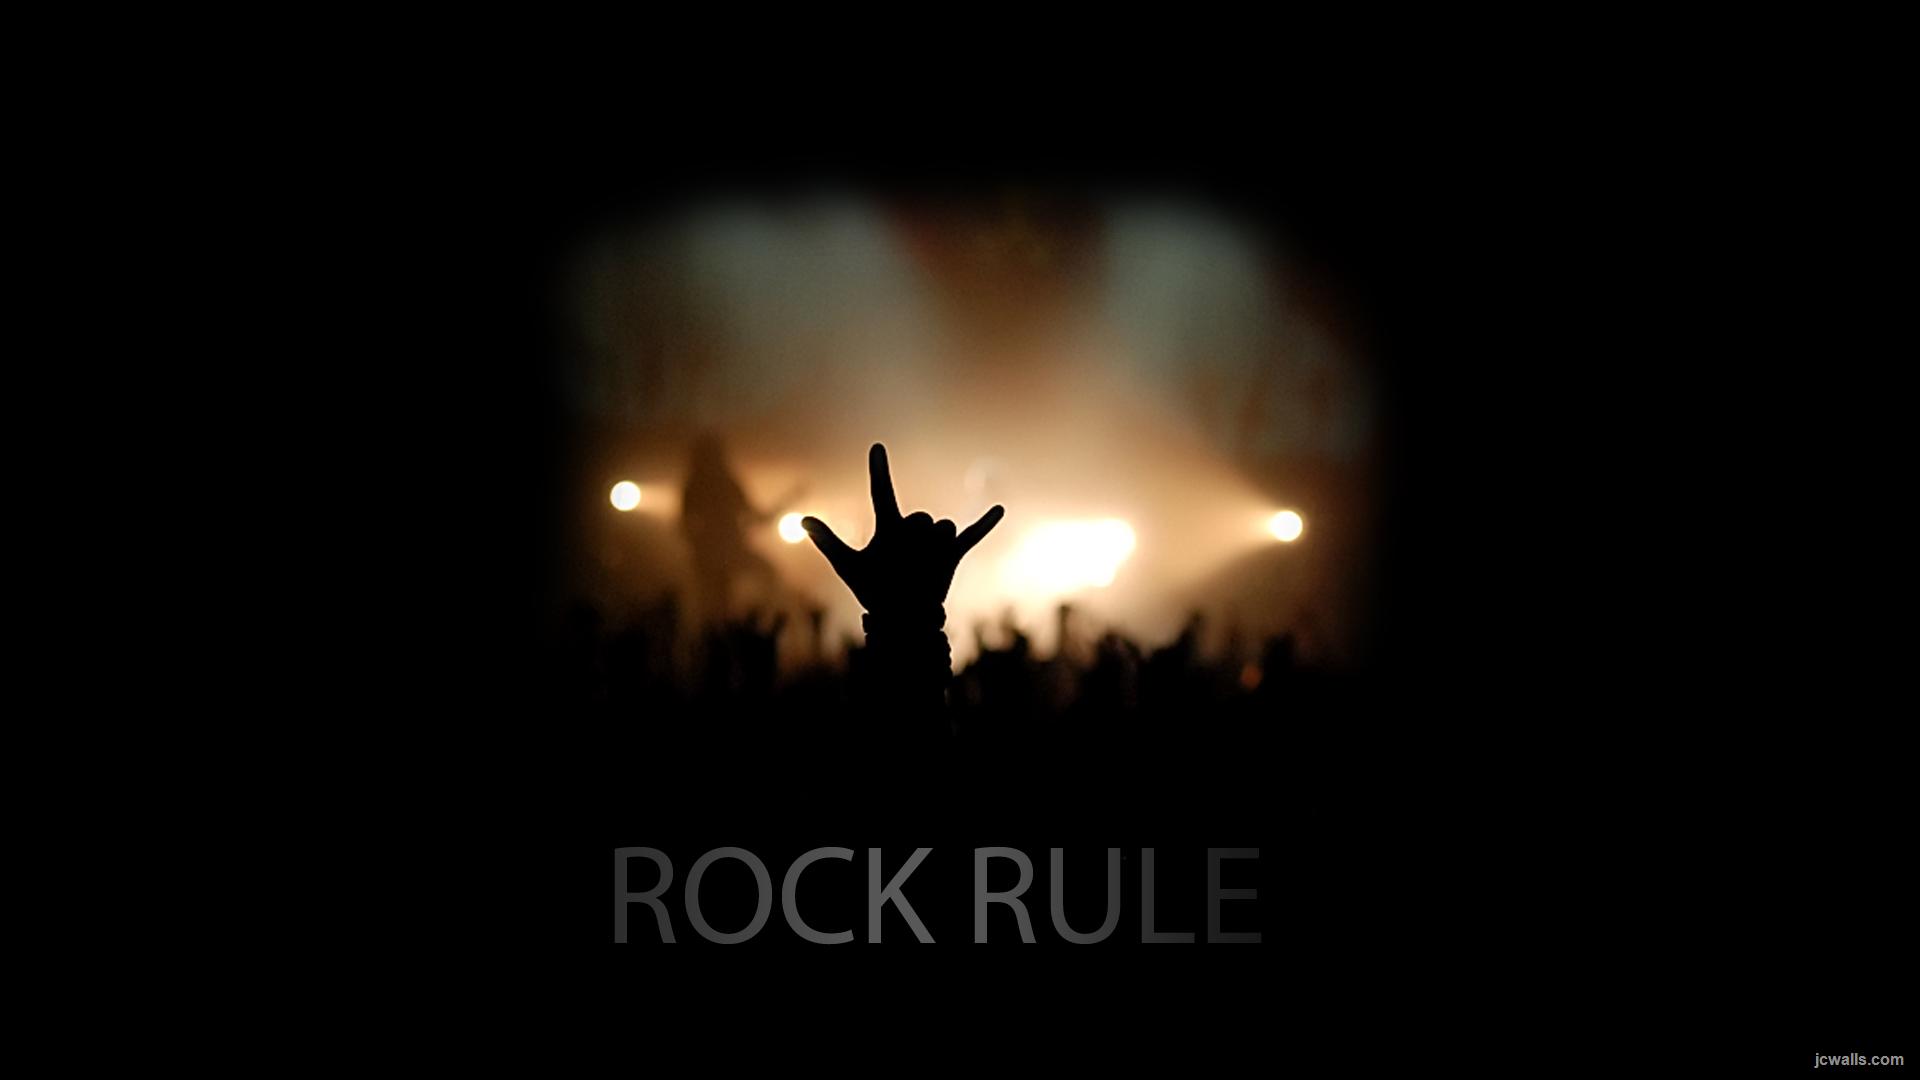 Music Hd Wallpapers/backgrounds For Free Download, - Keep Calm And Rock -  1920x1080 Wallpaper 